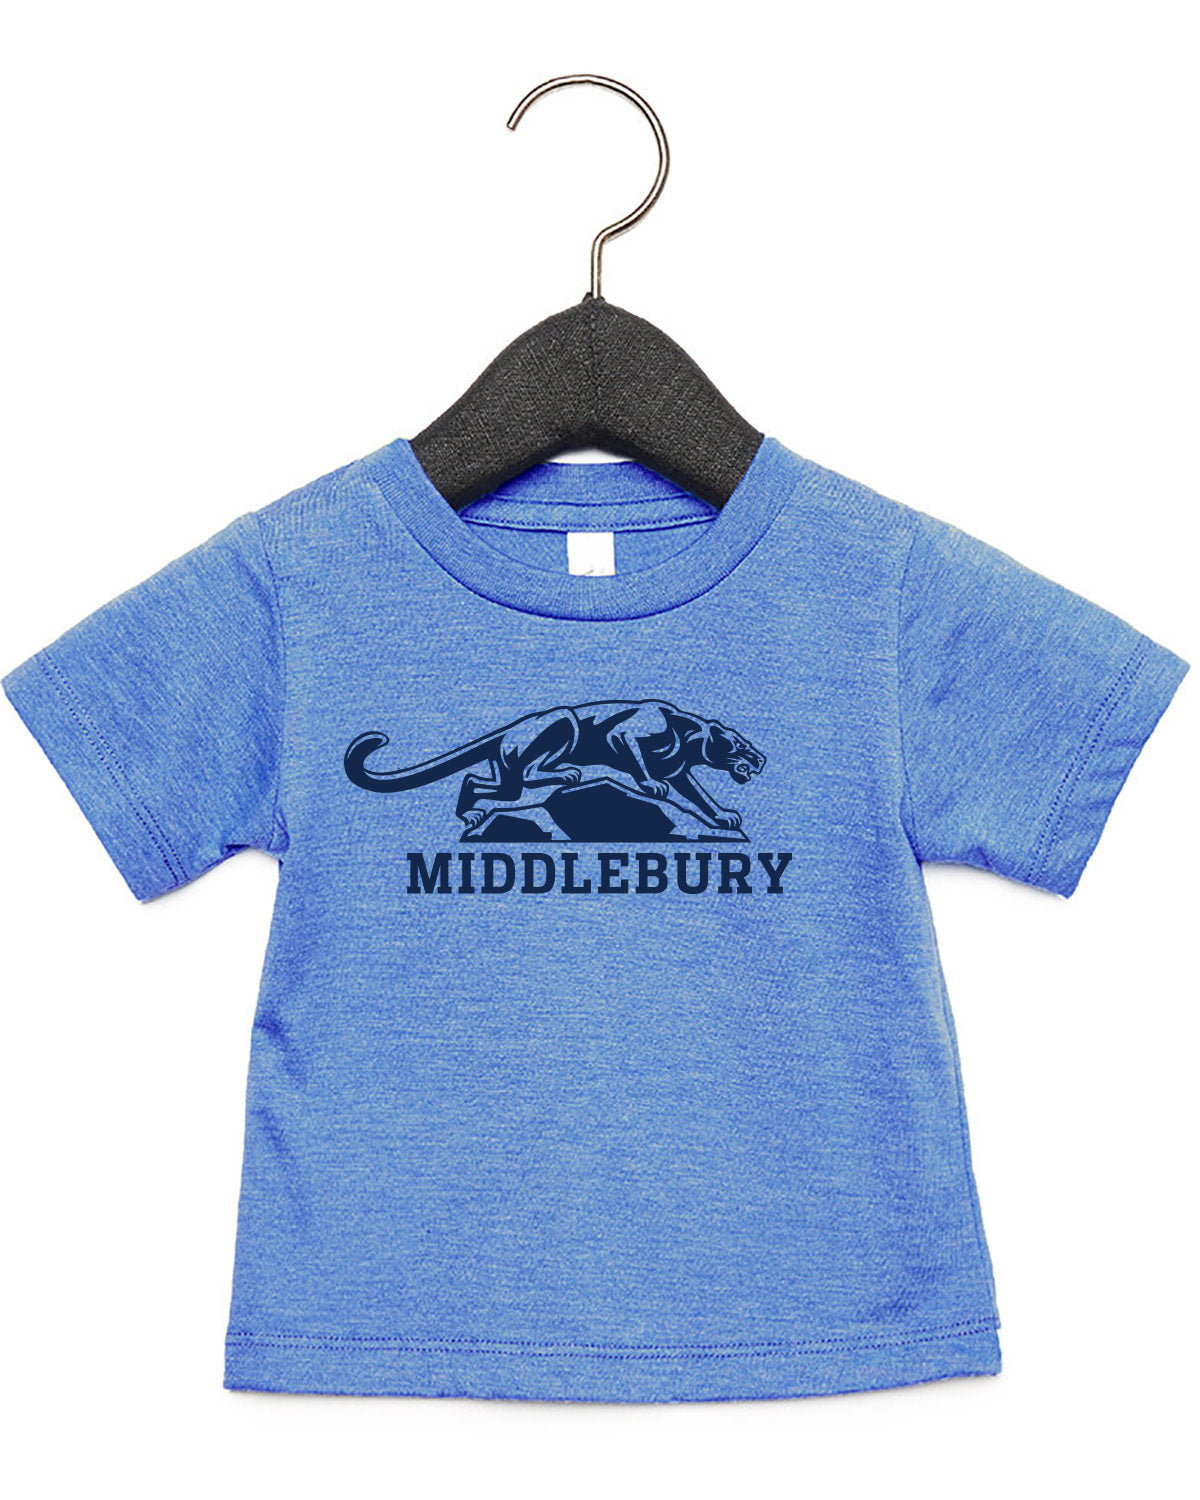 Middlebury Panther Infant T-Shirt (C-Blue)